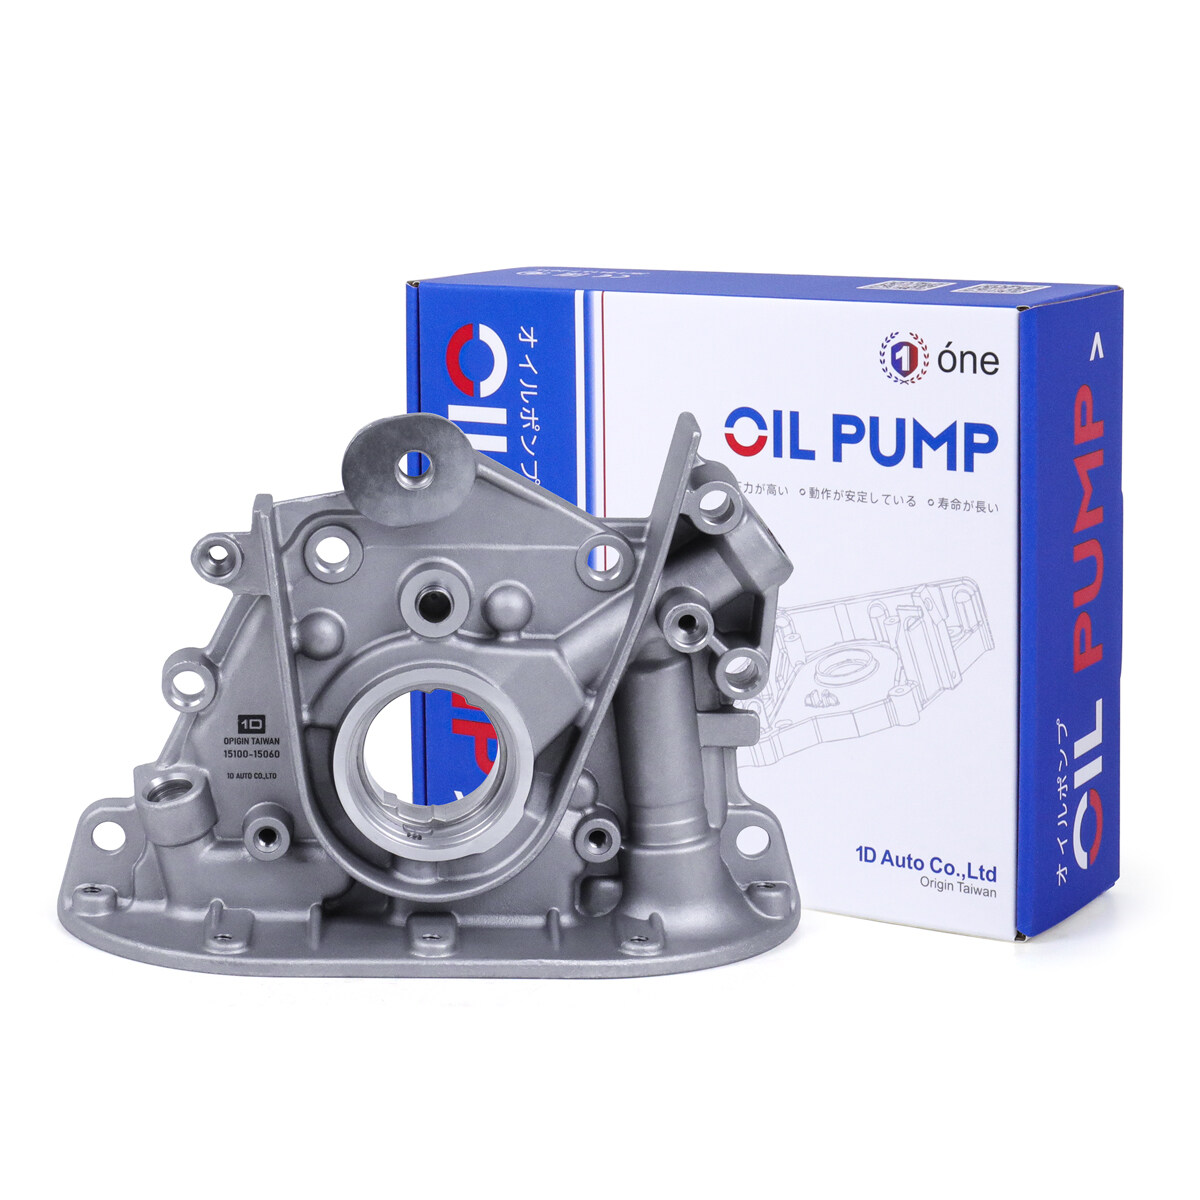 How long is the life of the oil pump?